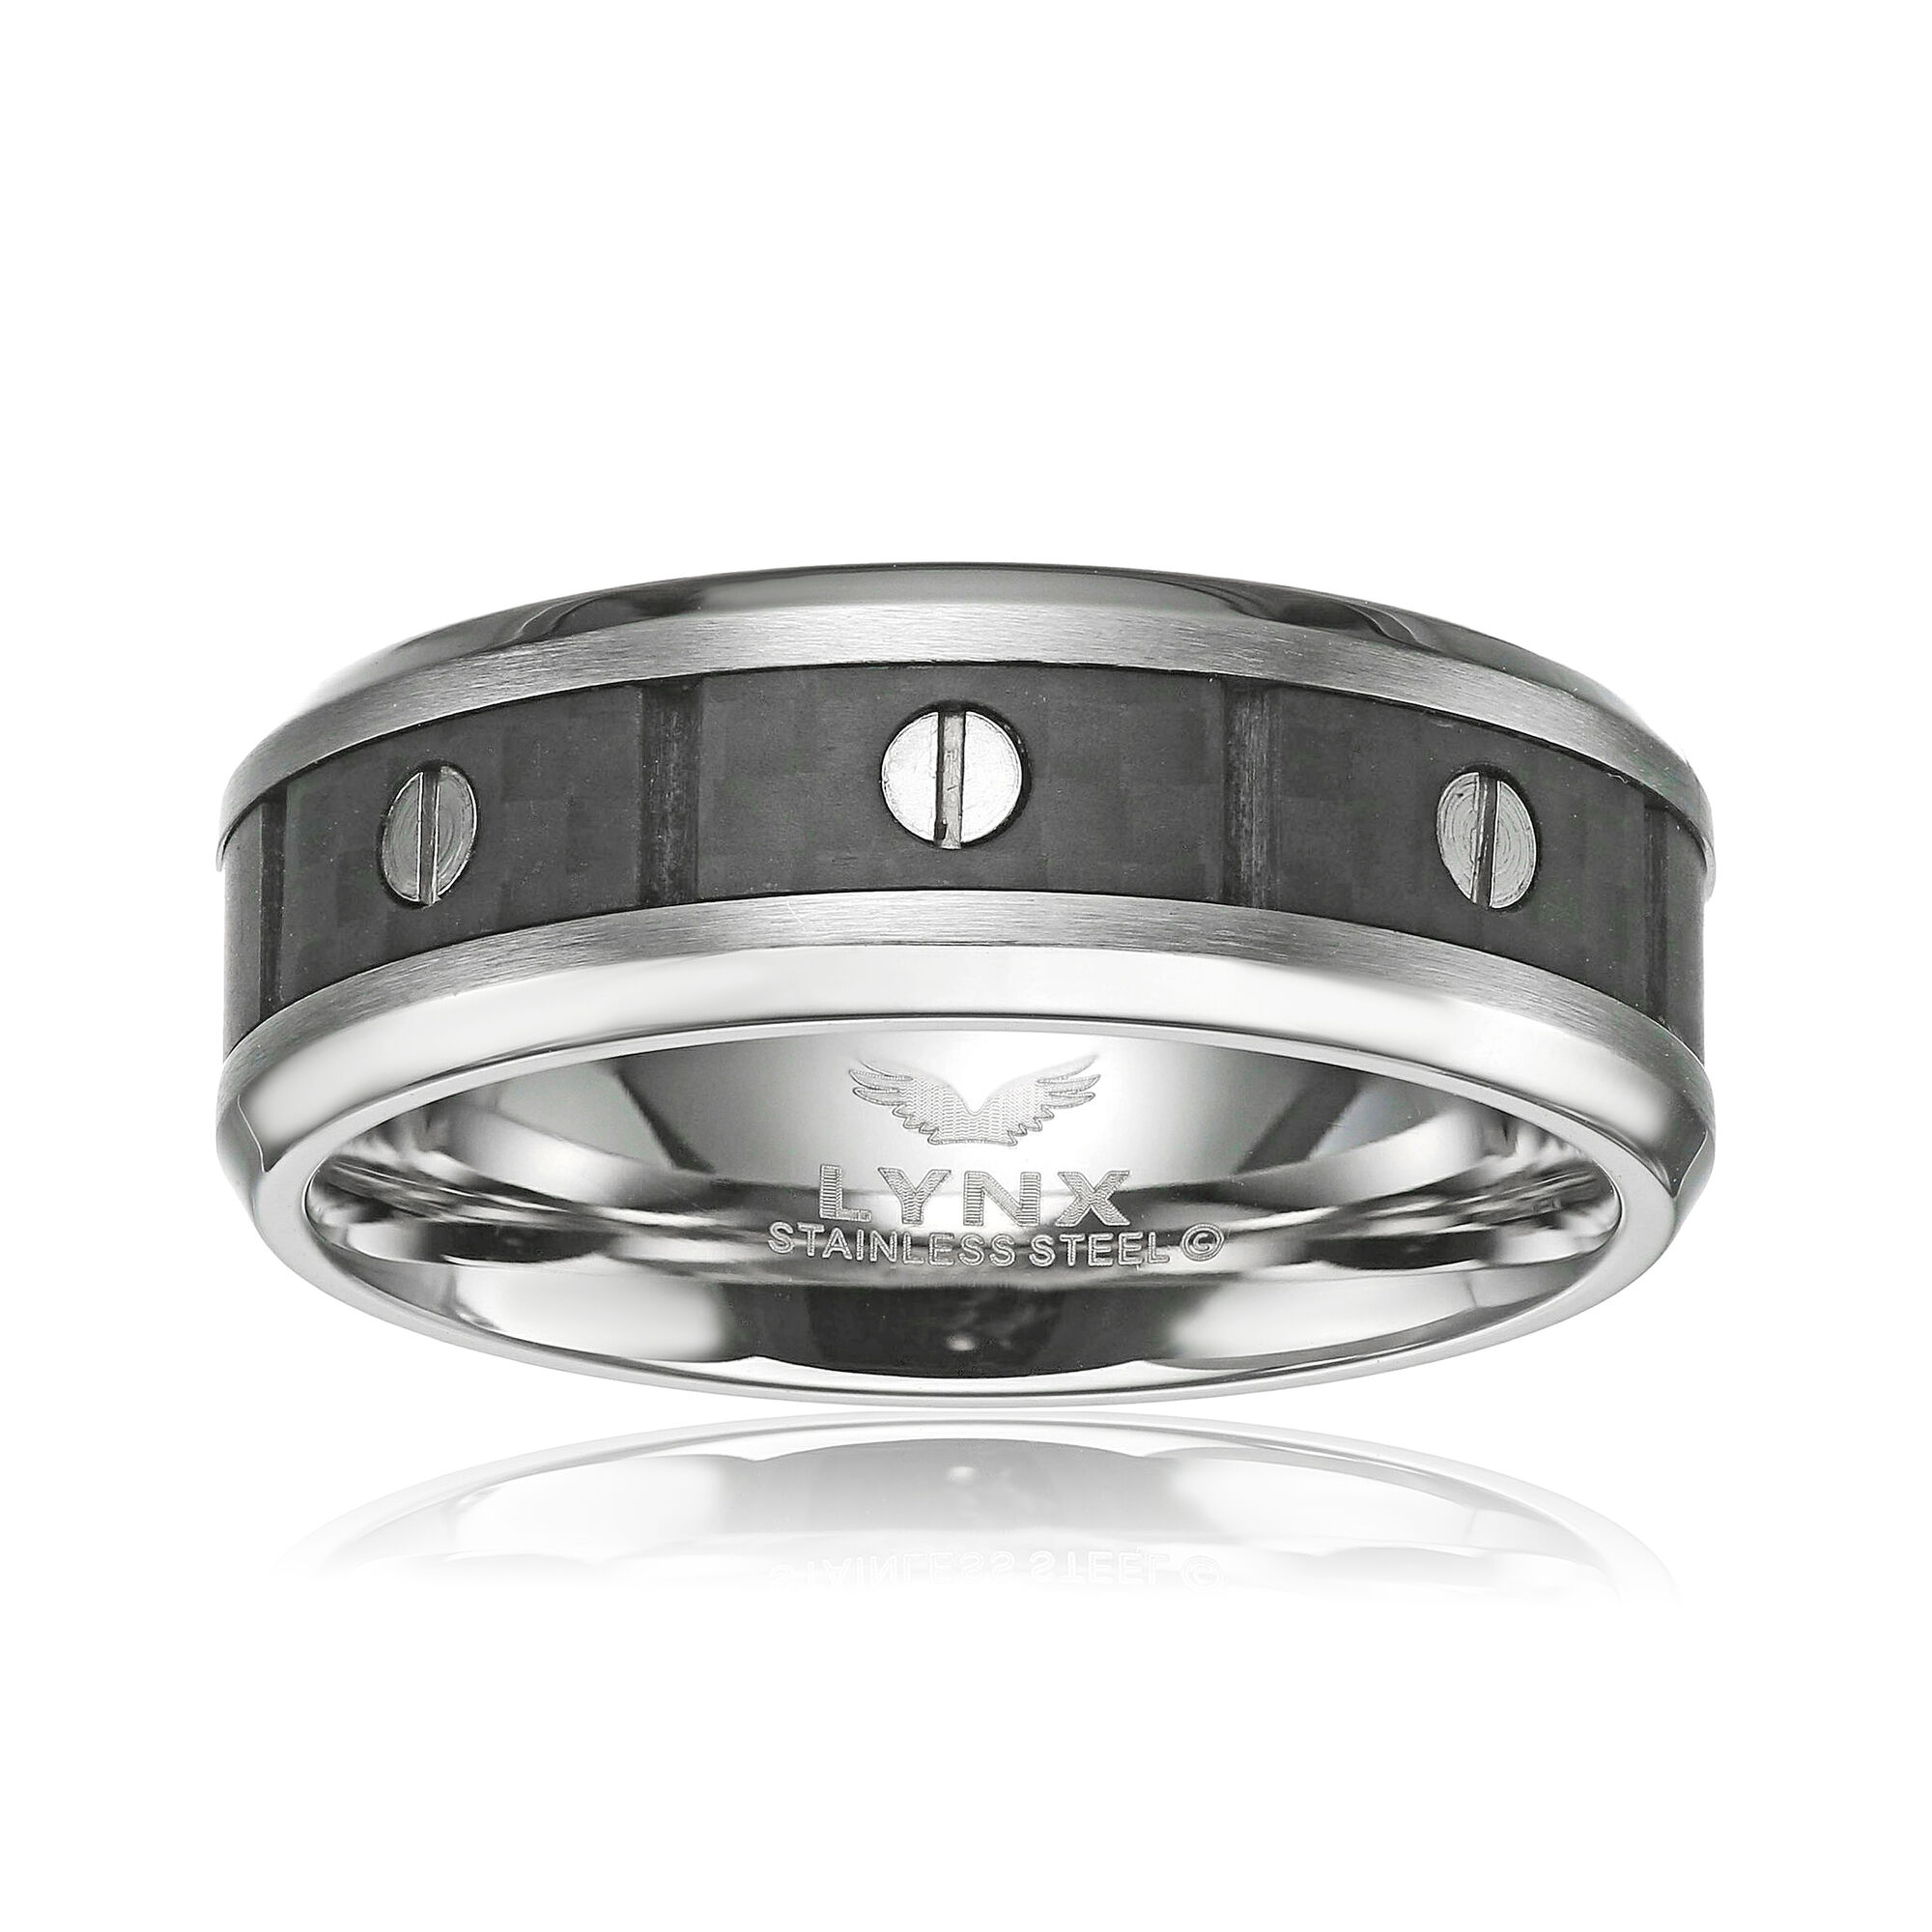 Men's Stainless Steel Ring with Frged Carbon Fiber  | Metro Jewelry